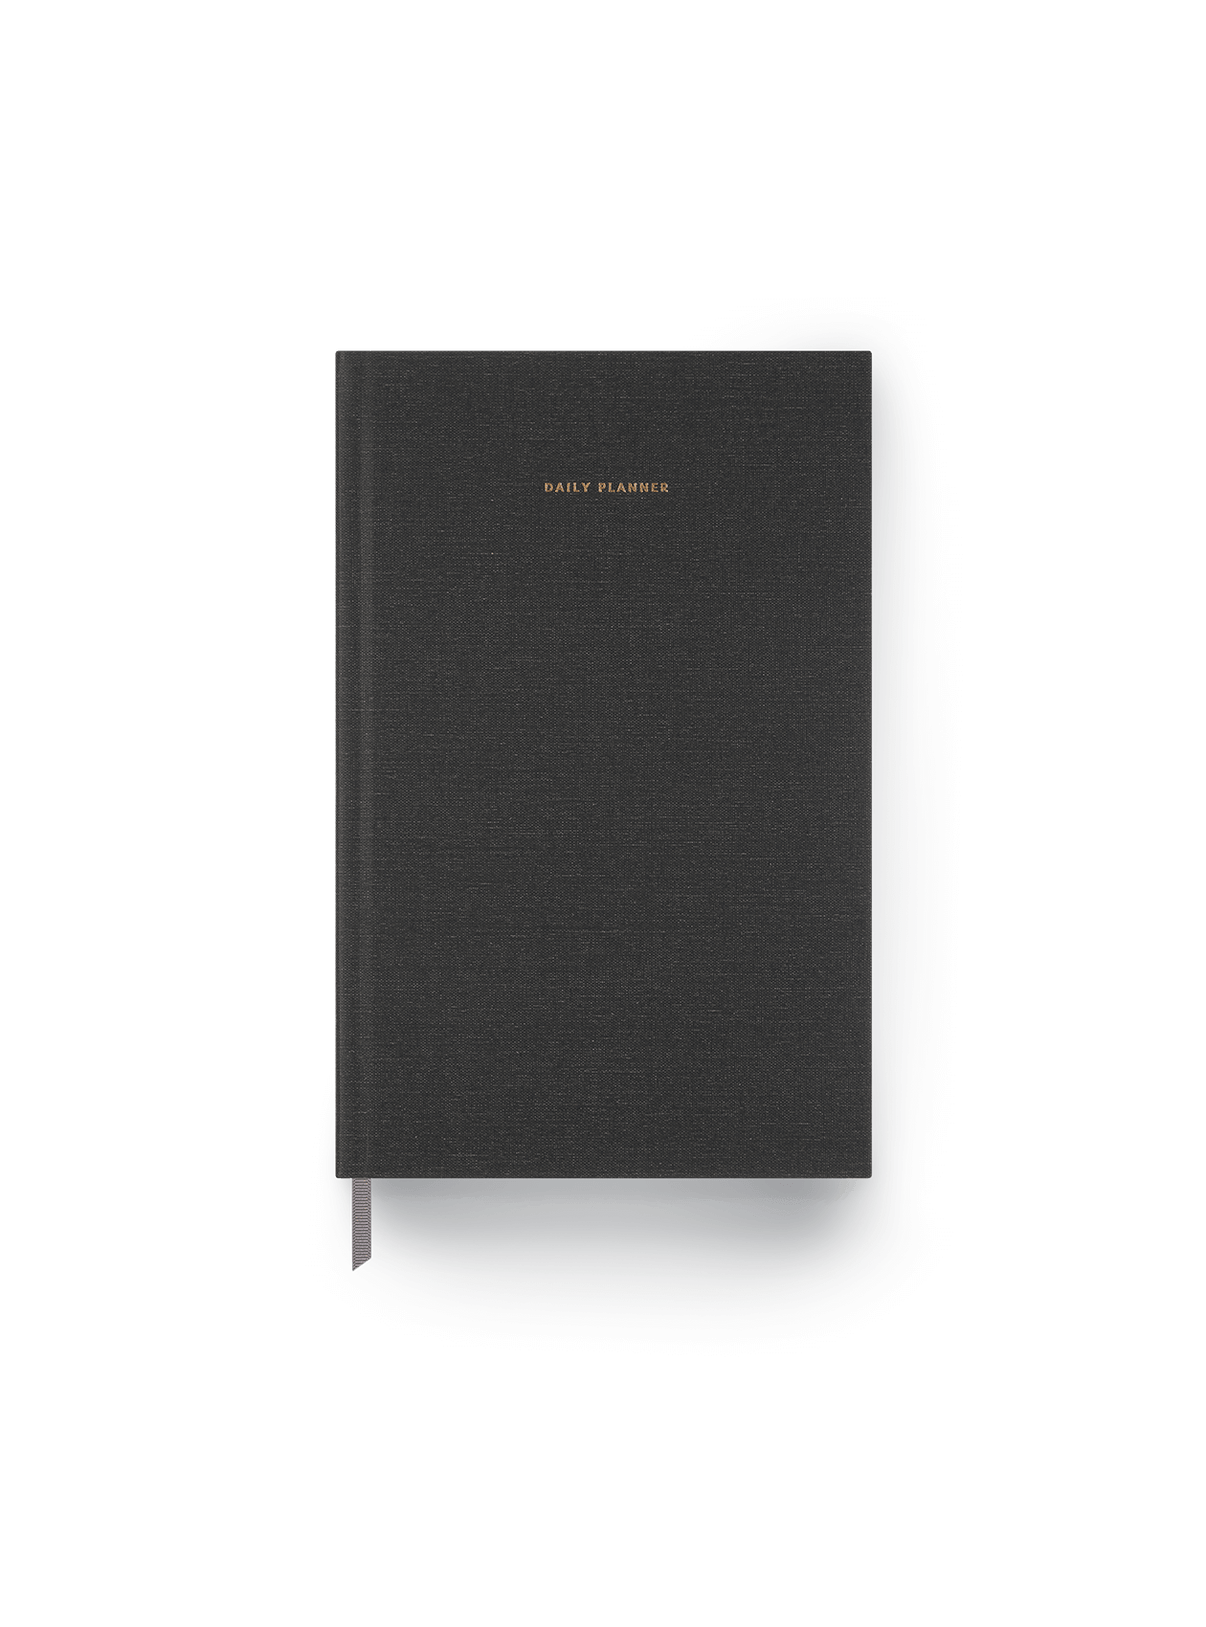 The Appointed 2024 Daily Planner in Charcoal Gray with casebound hardcover and gold foil details || Charcoal Gray